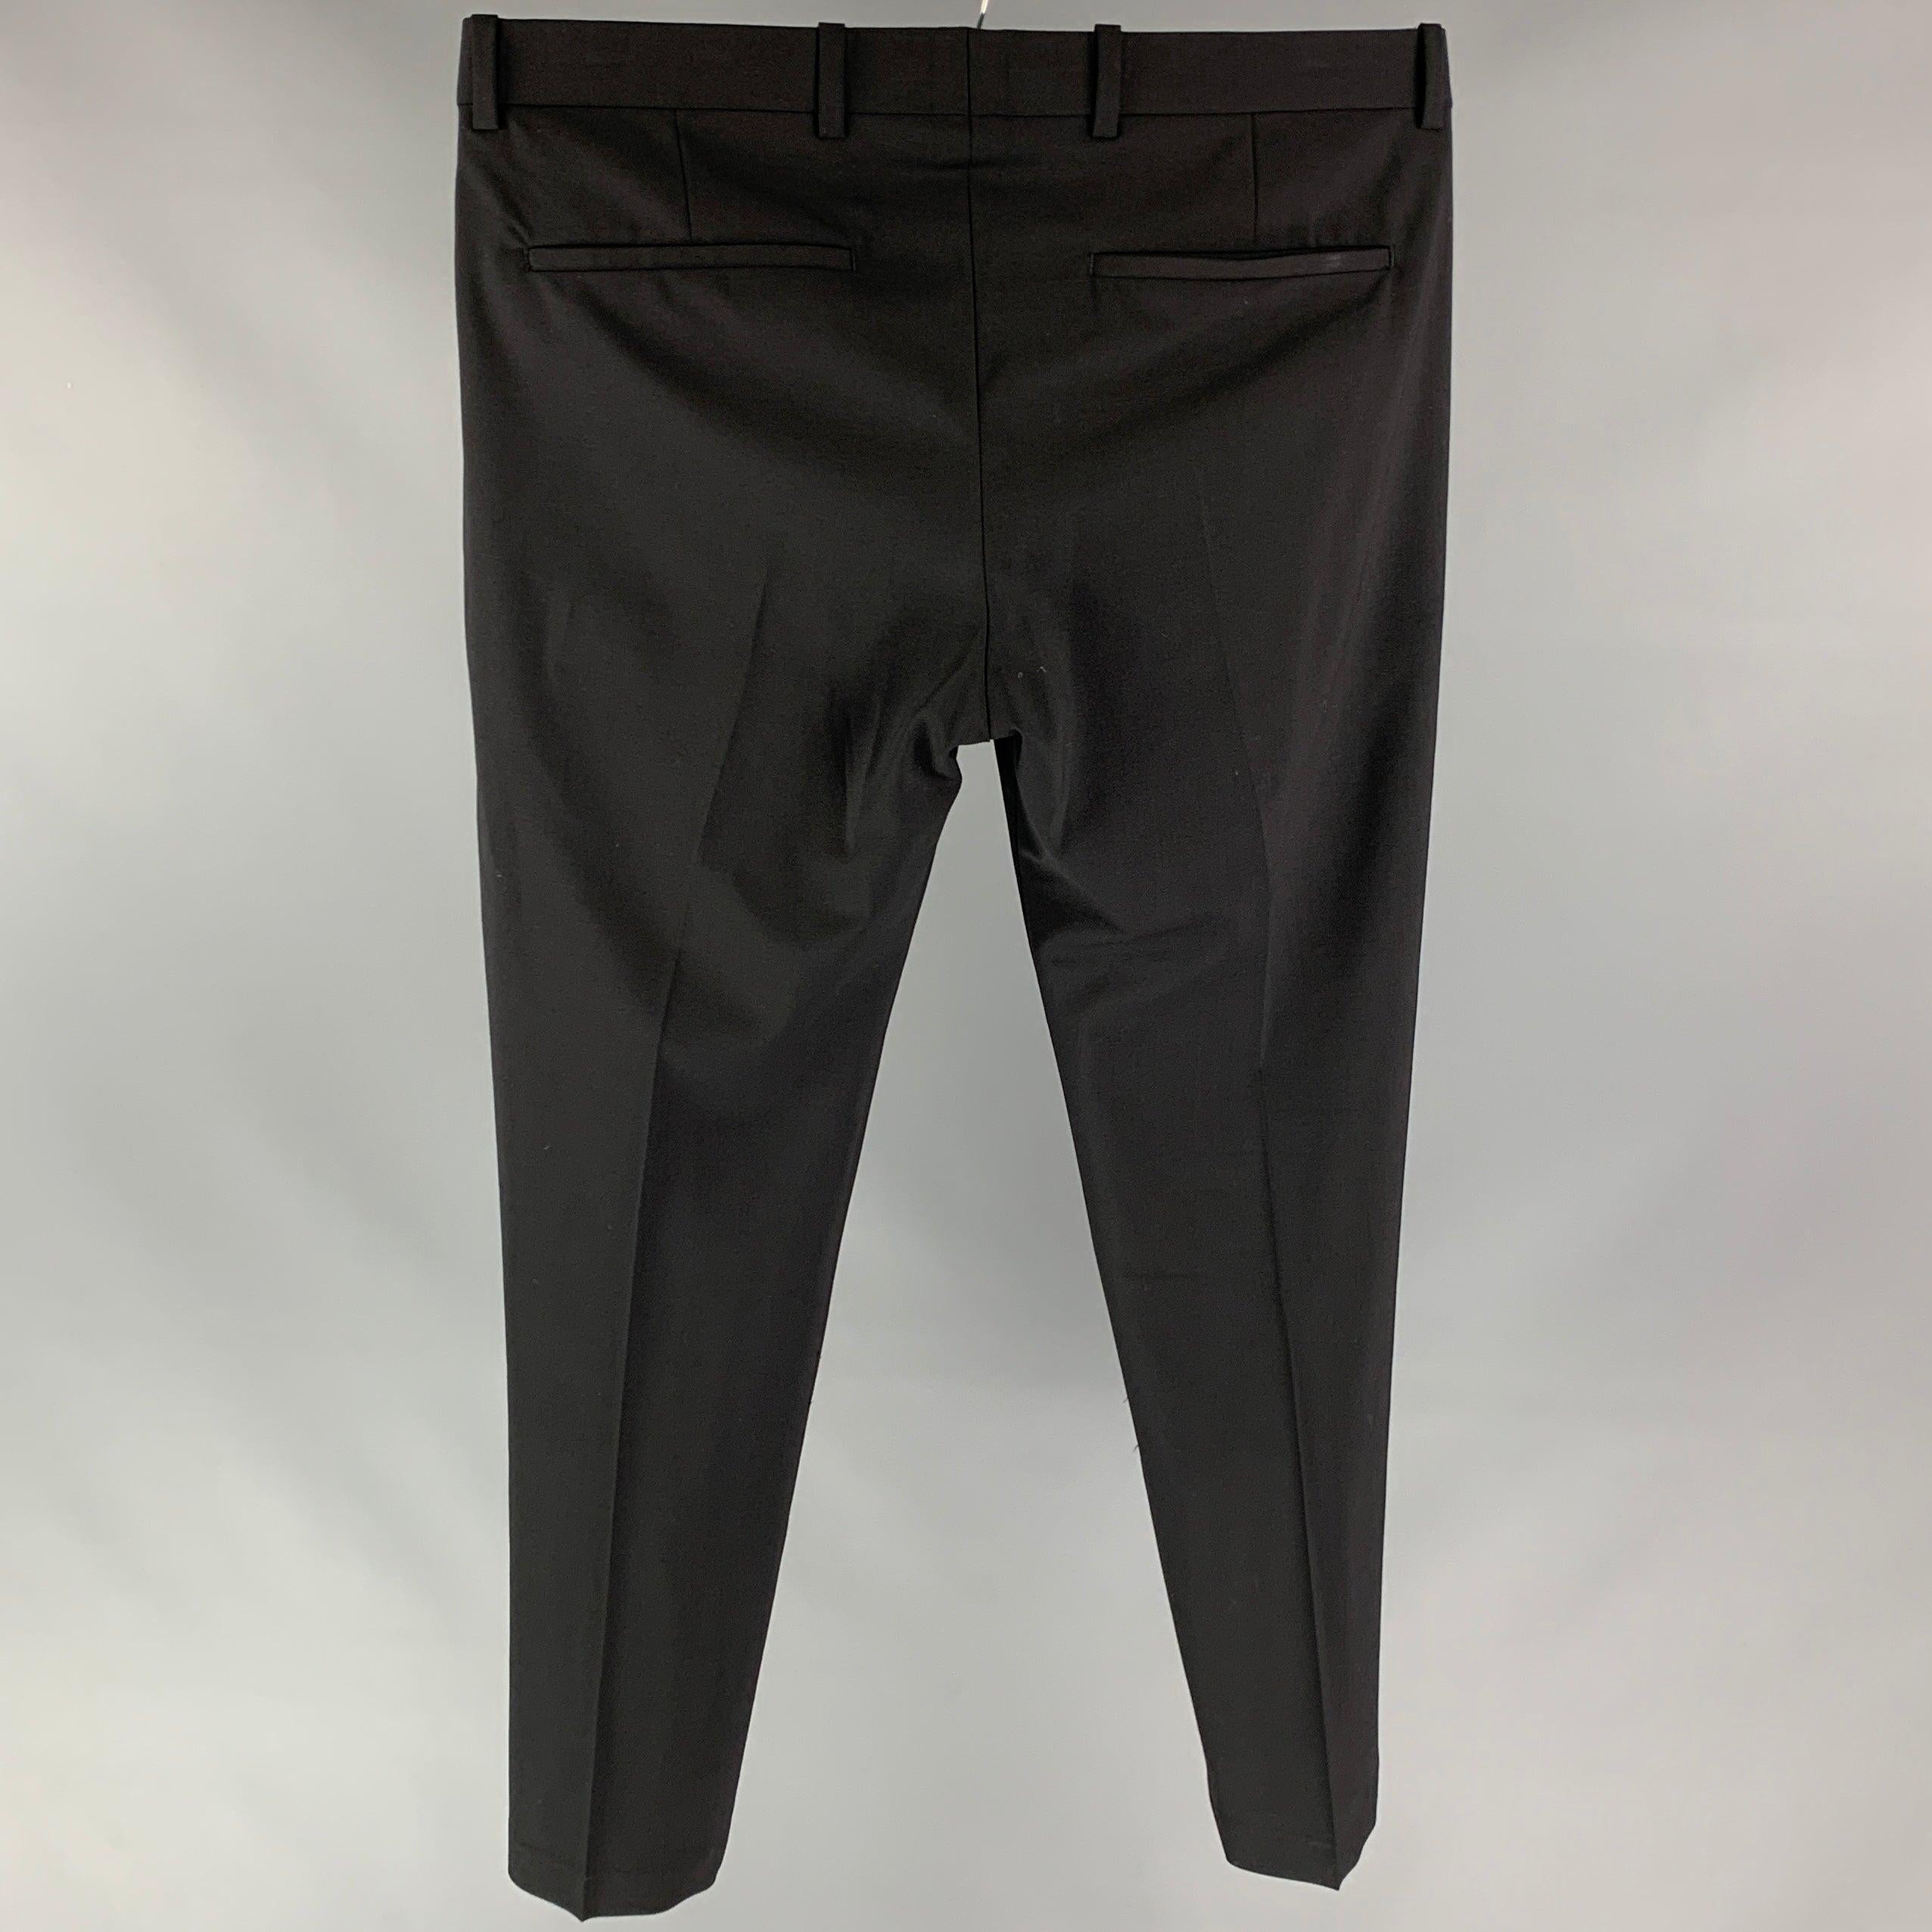 THEORY dress pants comes in a black wool / lycra featuring a flat front, slim fit, front tab, and a zip fly closure.Very Good Pre-Owned Condition. 

Marked:   31 

Measurements: 
  Waist: 34 inches  Rise: 11 inches  Inseam: 28 inches 
  
  
